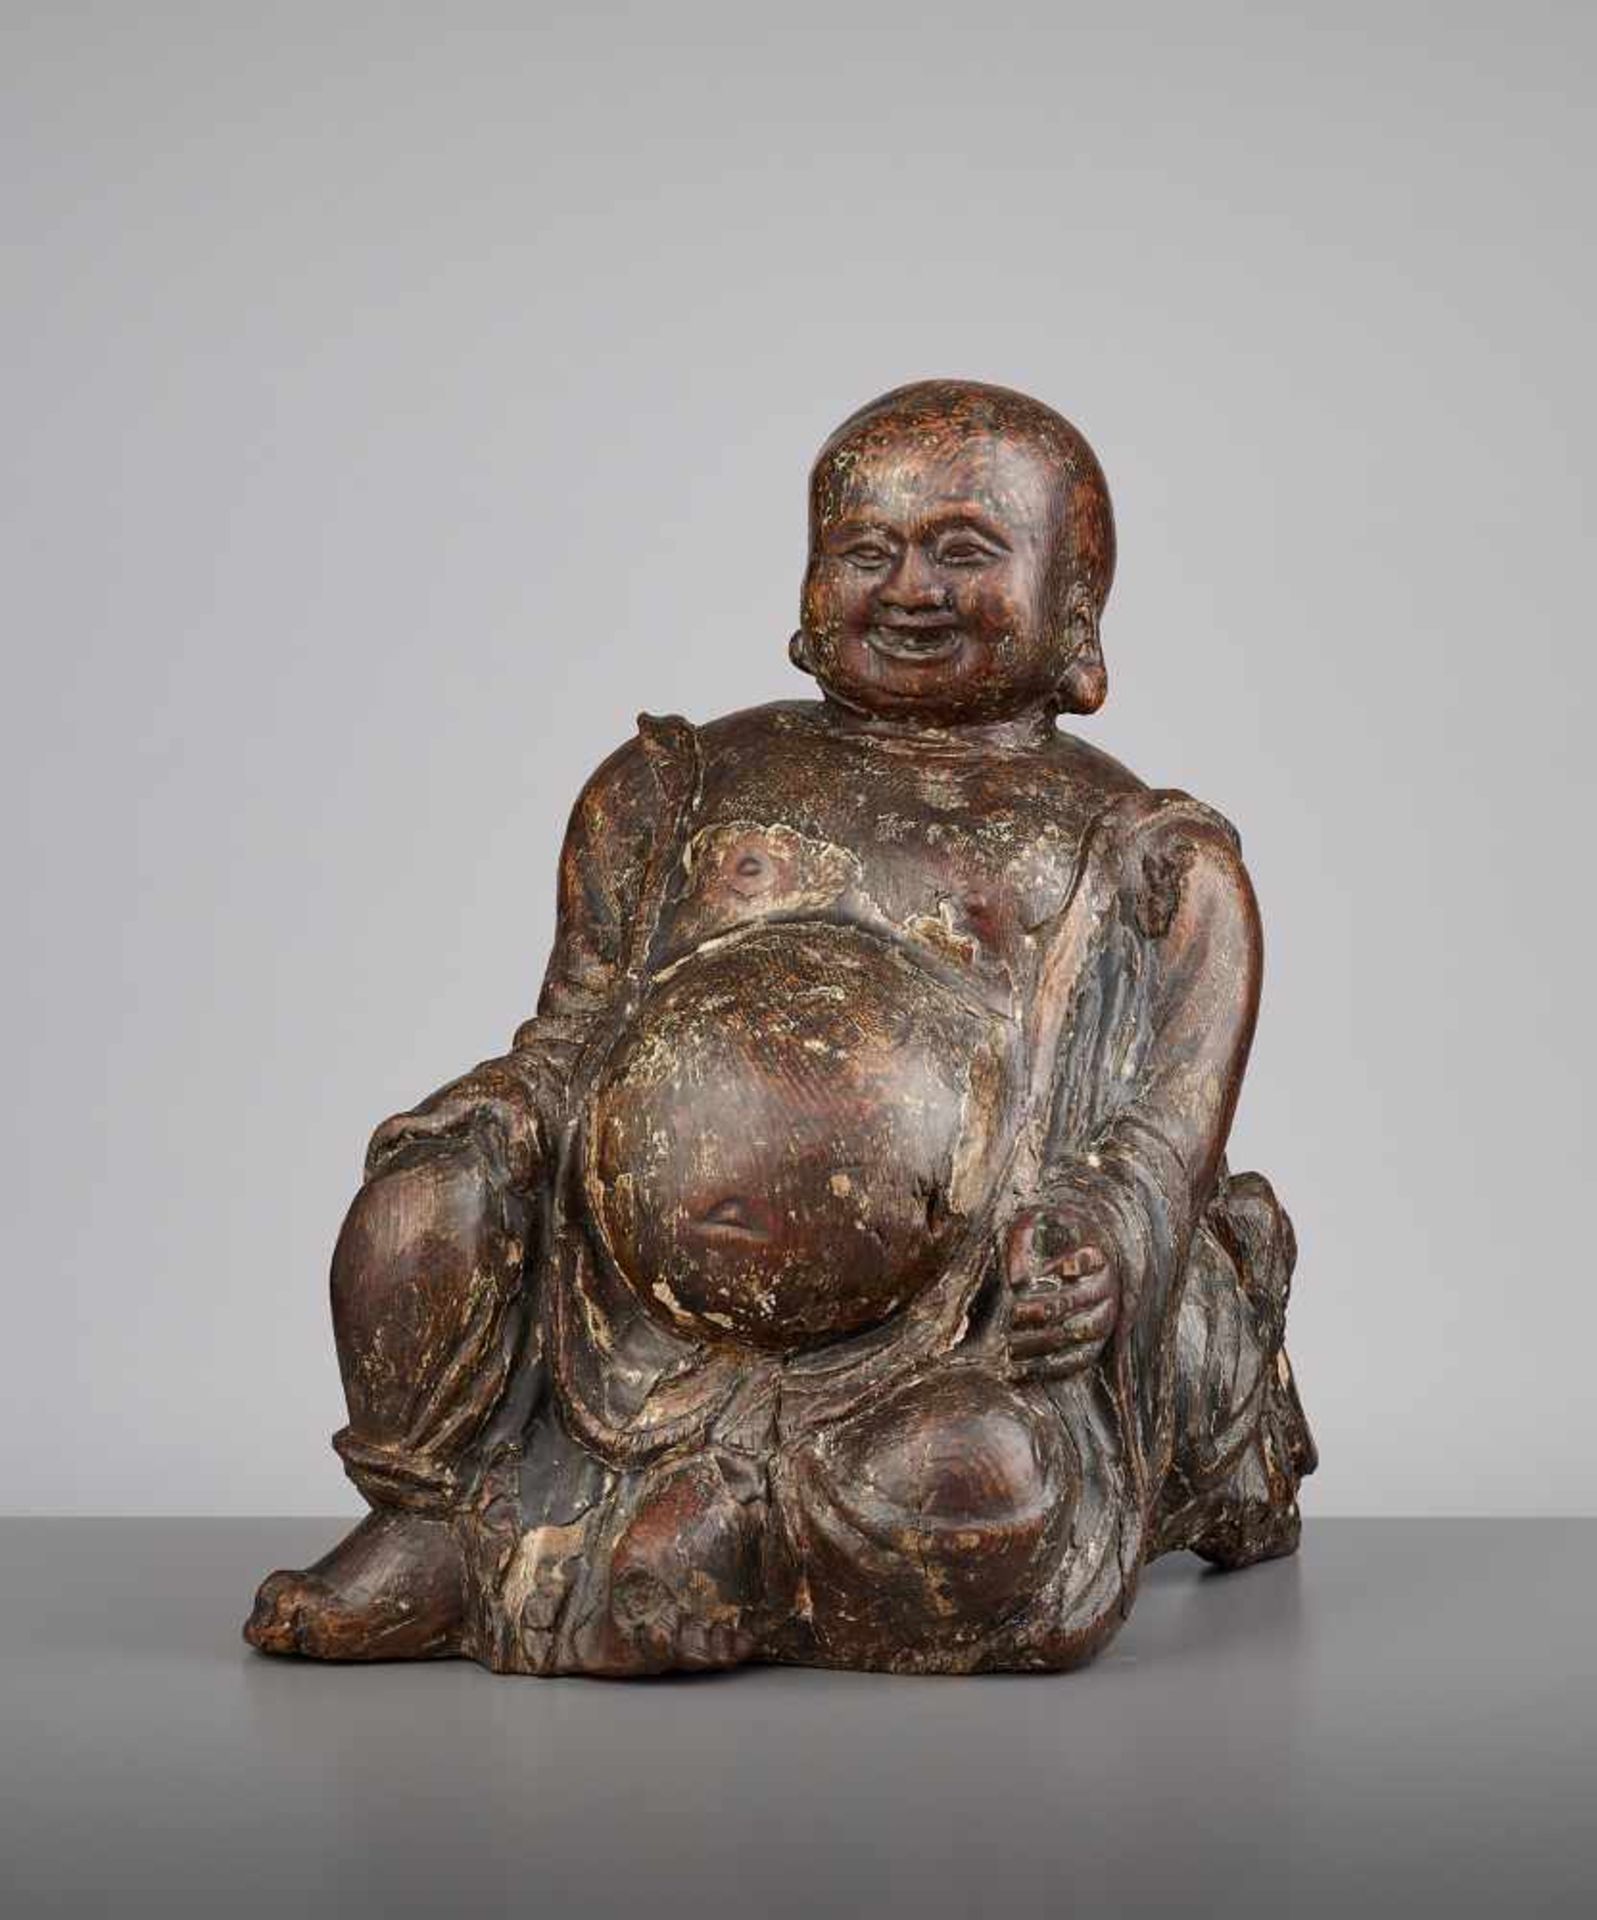 AN EXPRESSIVE WOOD BUDAI, MINGChina, 15th - 16th century. This earthy yet radiant sculpture of Budai - Image 2 of 9